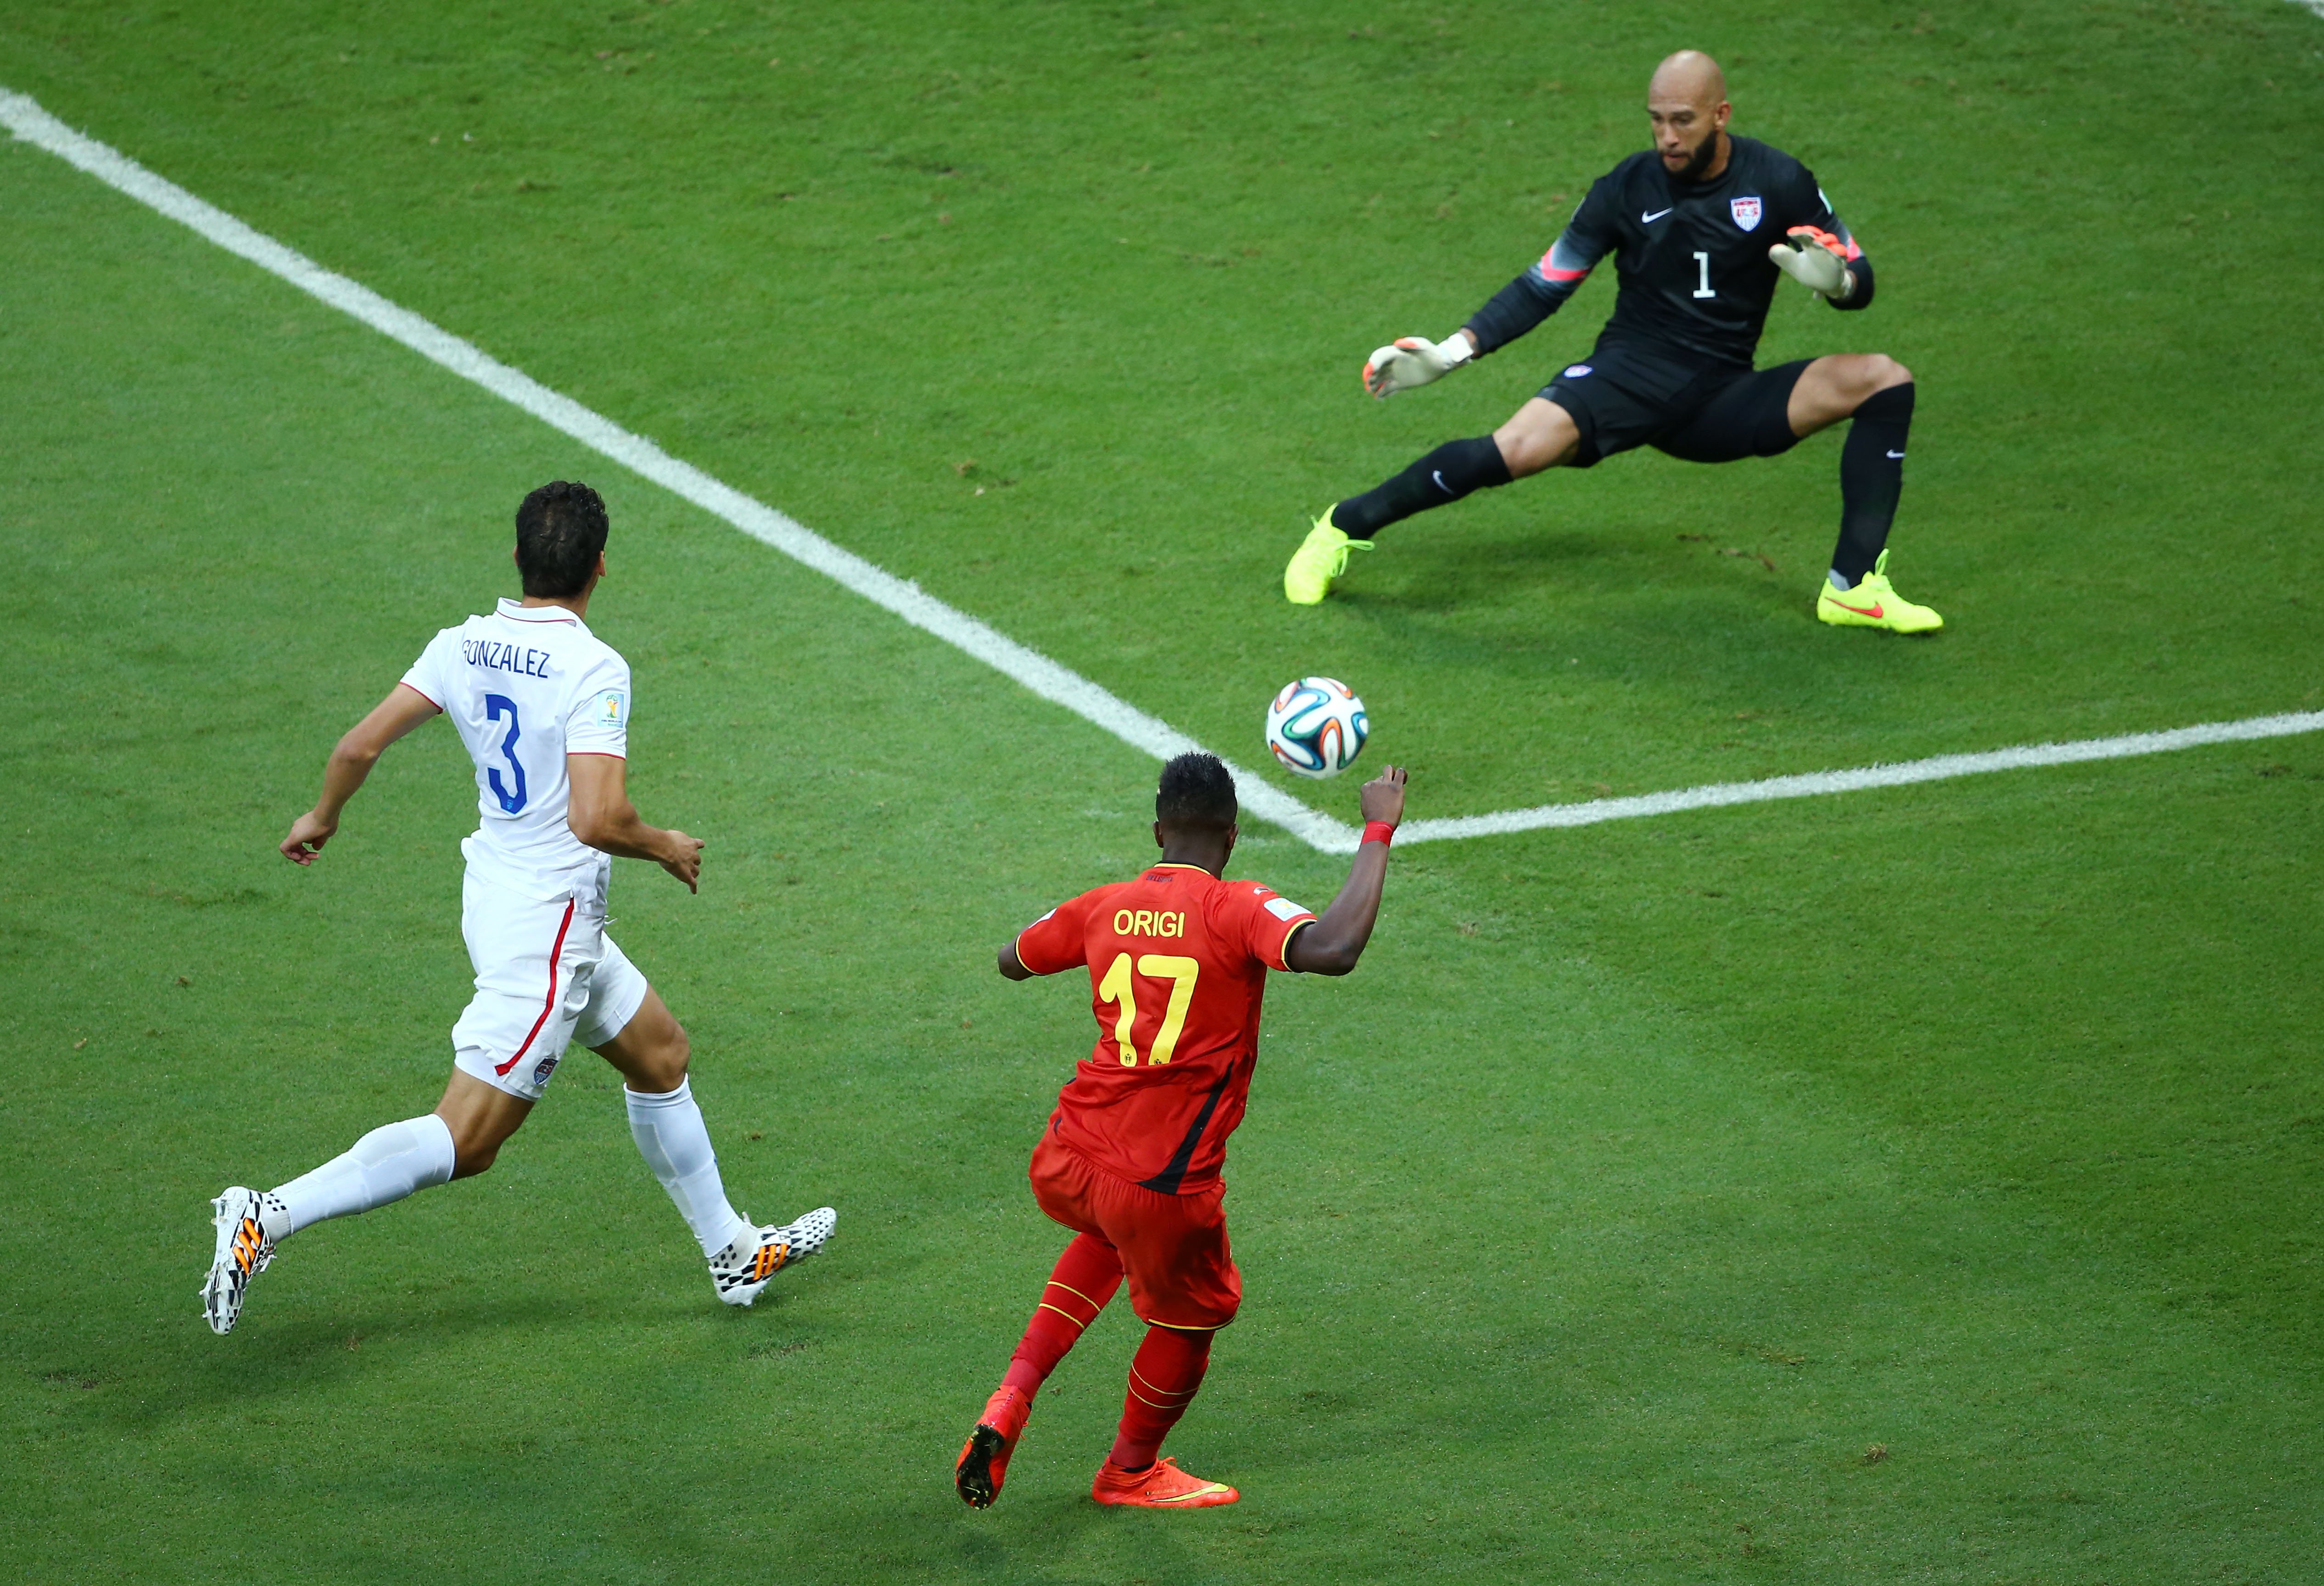 Divock Origi of Belgium shoots against Tim Howard of the United States during the match between Belgium and the United States at Arena Fonte Nova on July 1, 2014 in Salvador, Brazil.